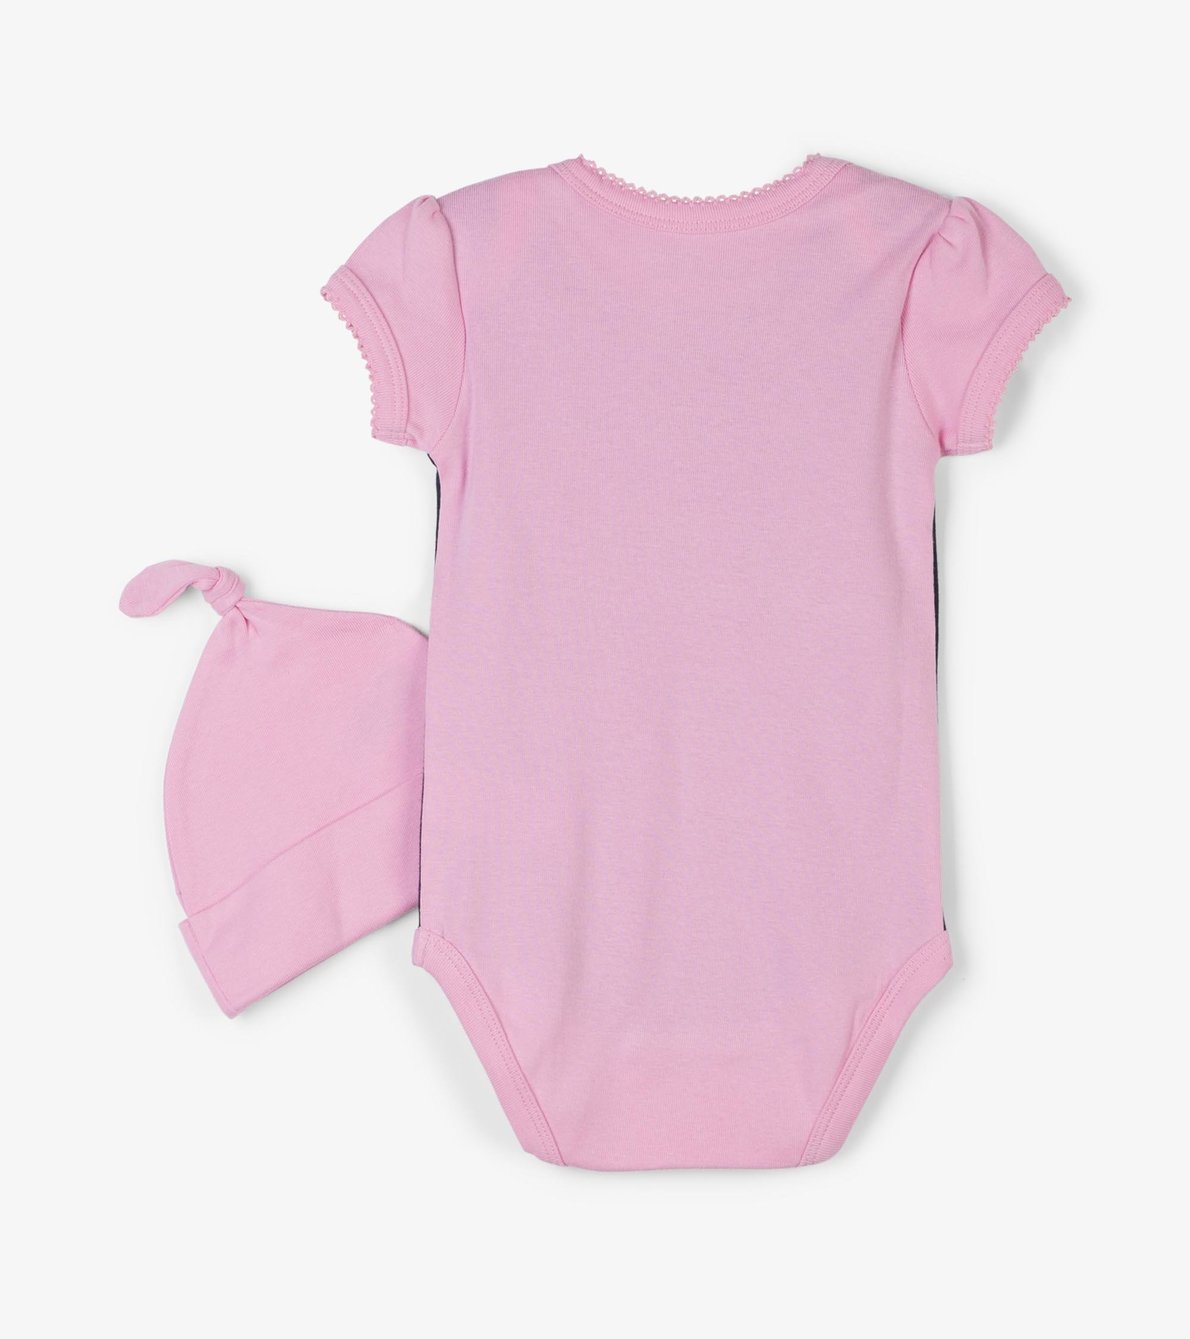 View larger image of Pink Heart Breaker Baby Bodysuit with Hat